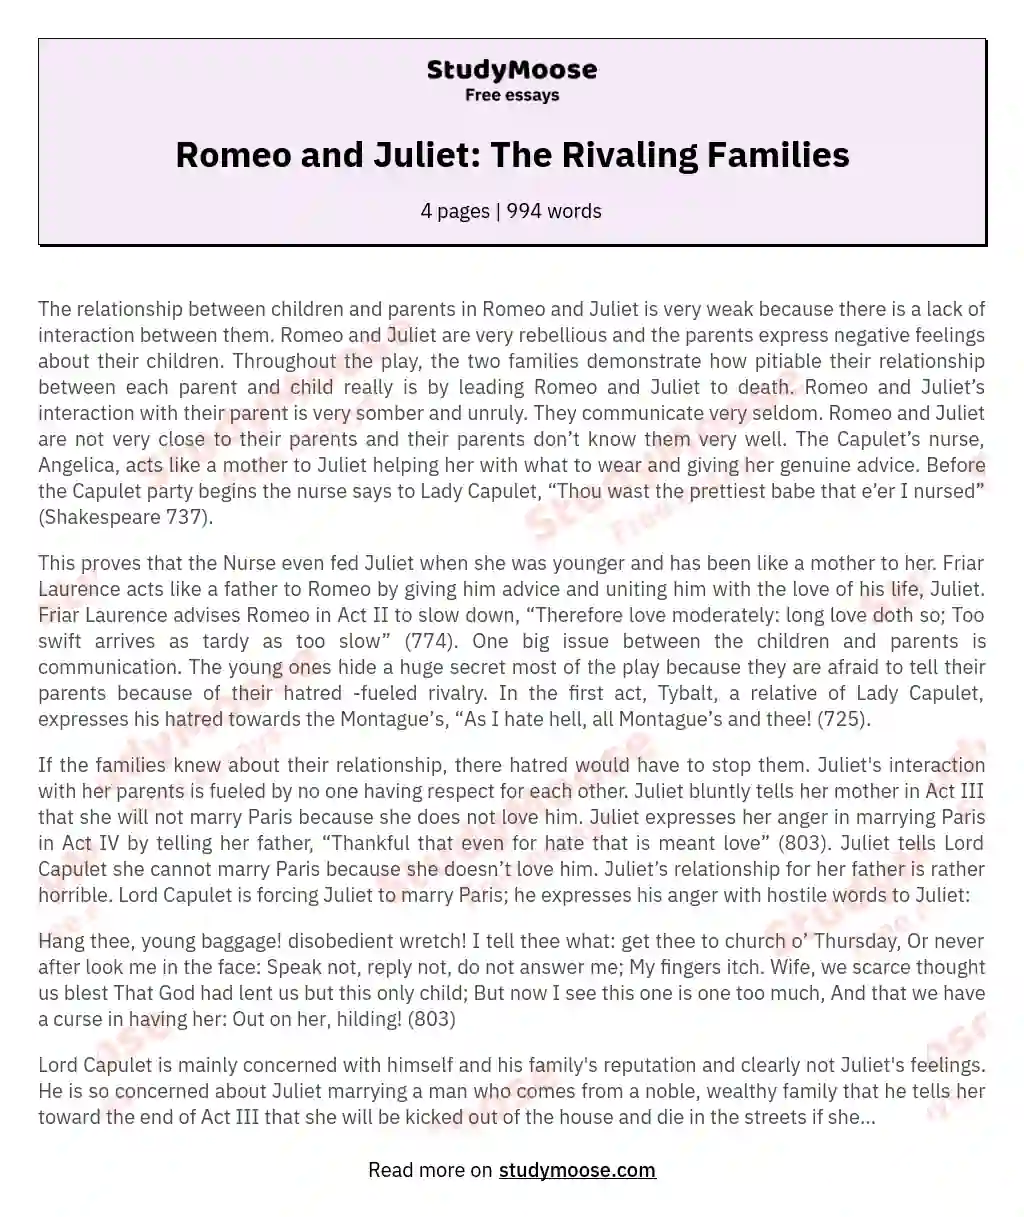 Romeo and Juliet: The Rivaling Families essay